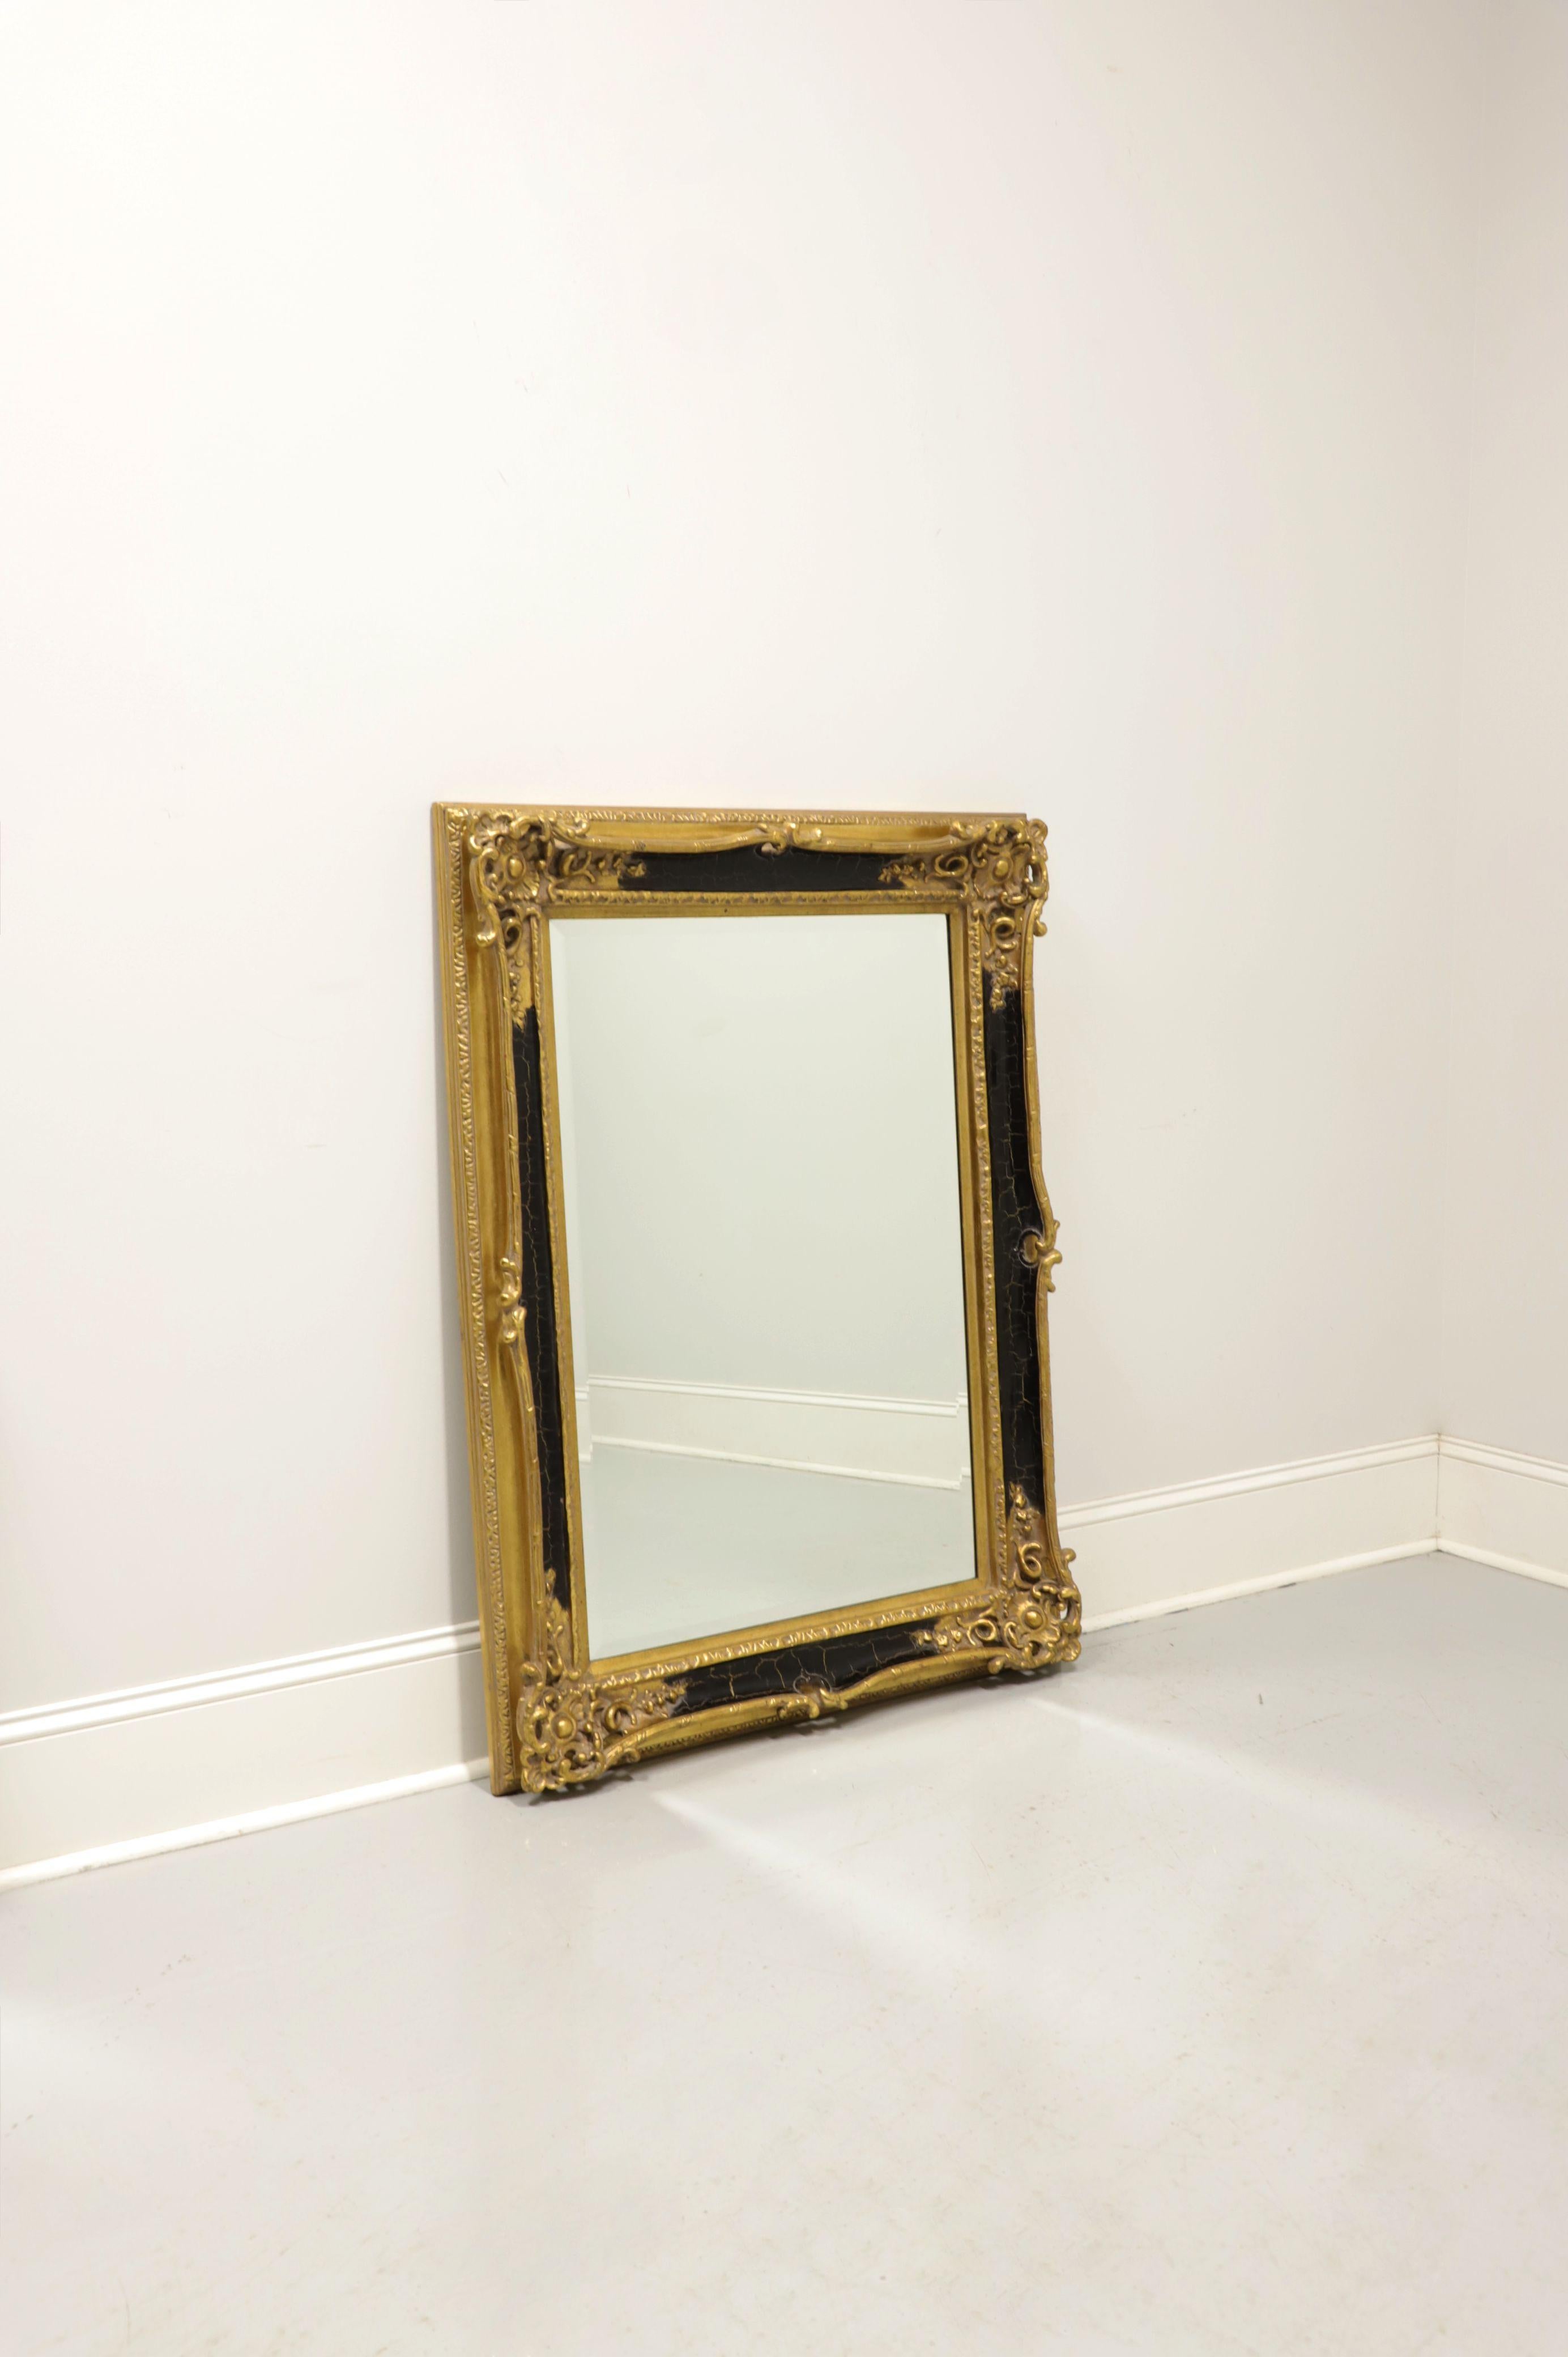 A Traditional style wall mirror, unbranded. Beveled edge mirror glass in an ornately carved wood frame with a crackle finish of gold gilt and black. Made in the USA, in the late 20th Century.

Measures: 34.5W 3.5D 46.25H, Weighs 30lbs

Exceptionally